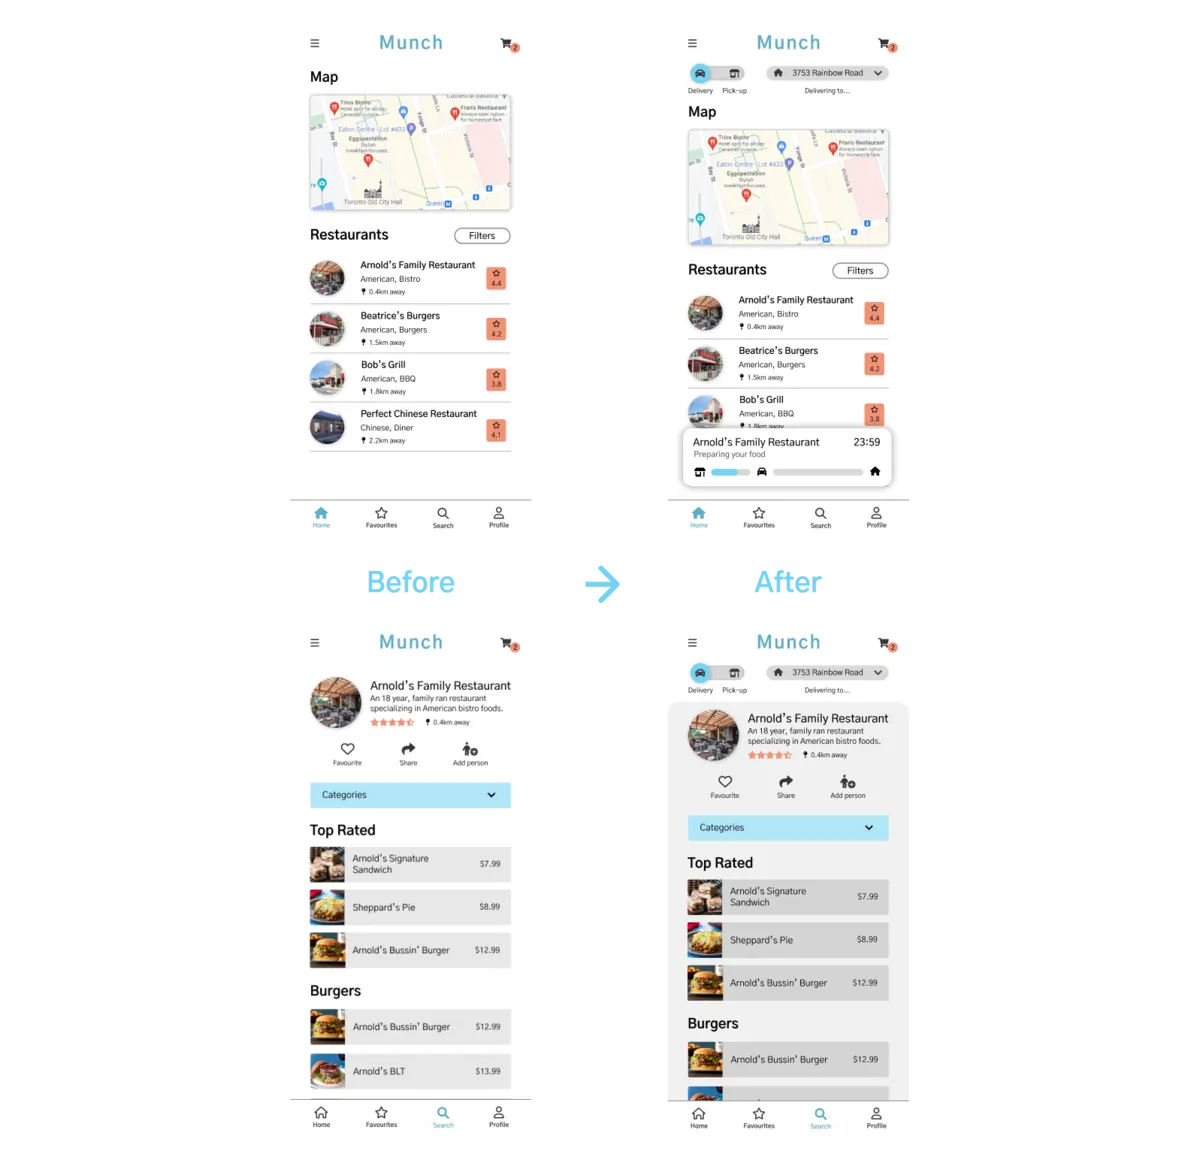 A comparison between the digital wireframe (home screen and restaurant screen) before and after the usability study